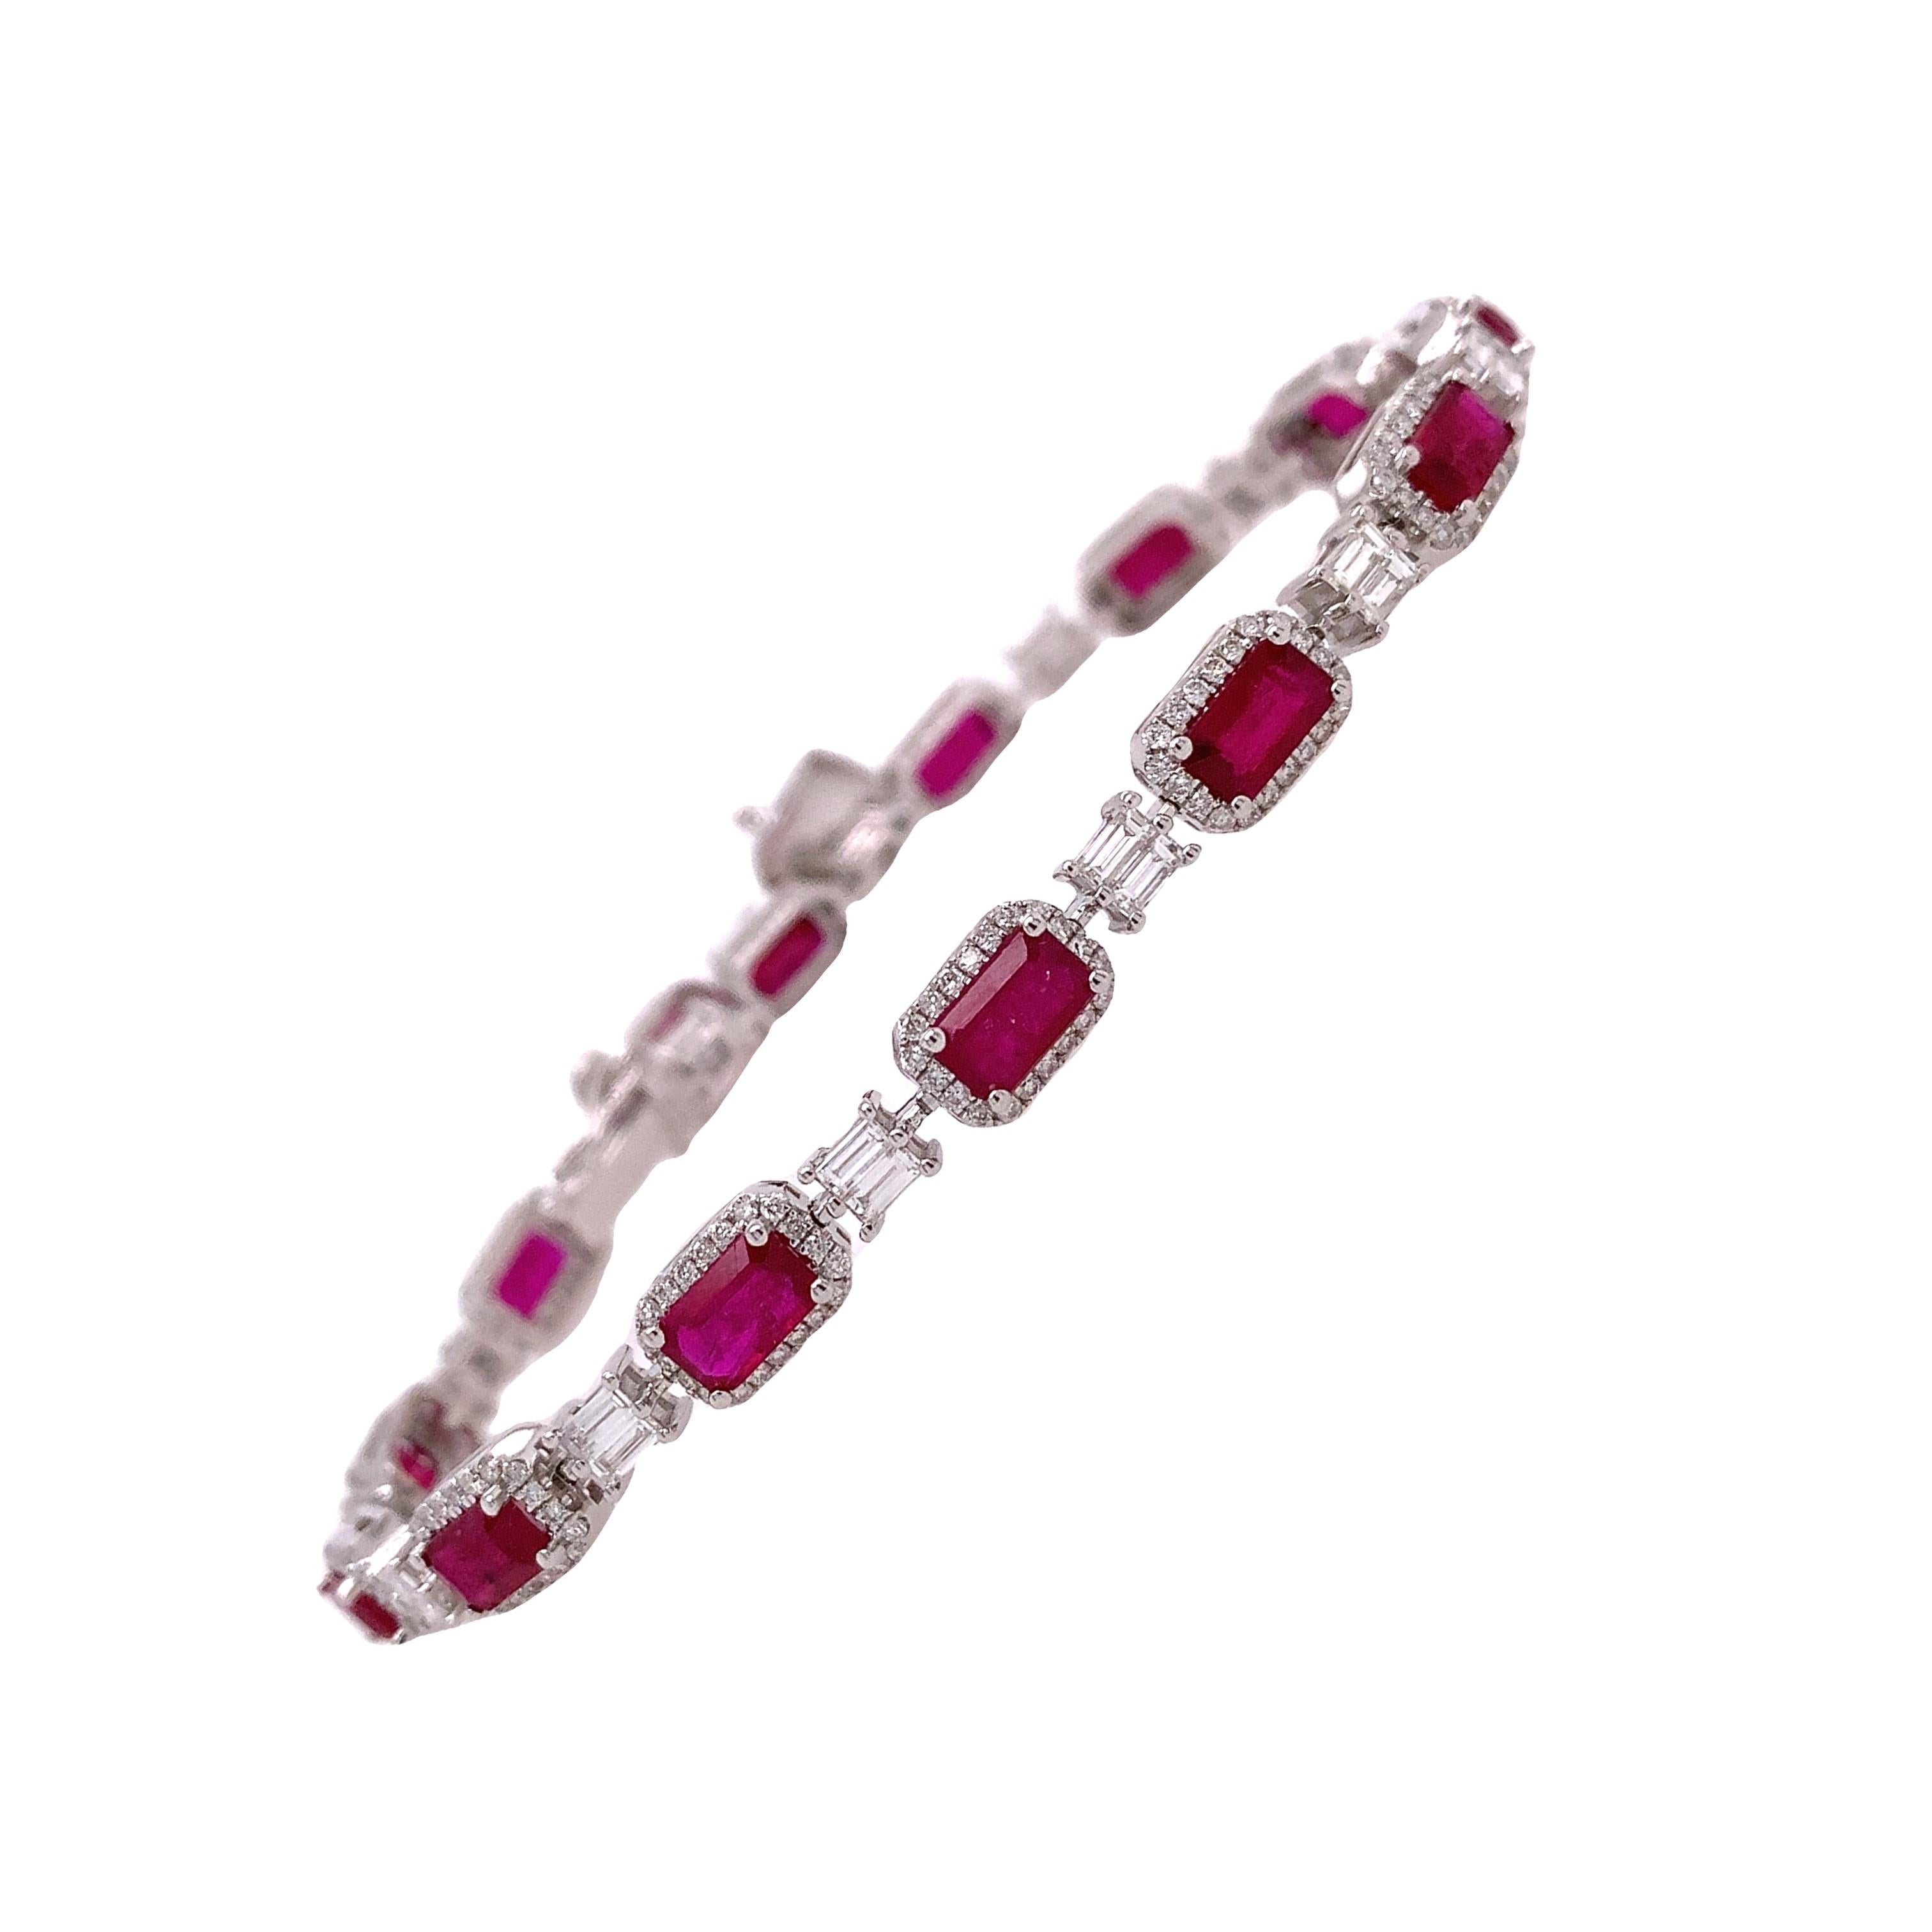 18K White Gold
Ruby: 4.67ct total weight.
Diamond: 1.52ct total weight,
All diamonds are G-H/SI stones.